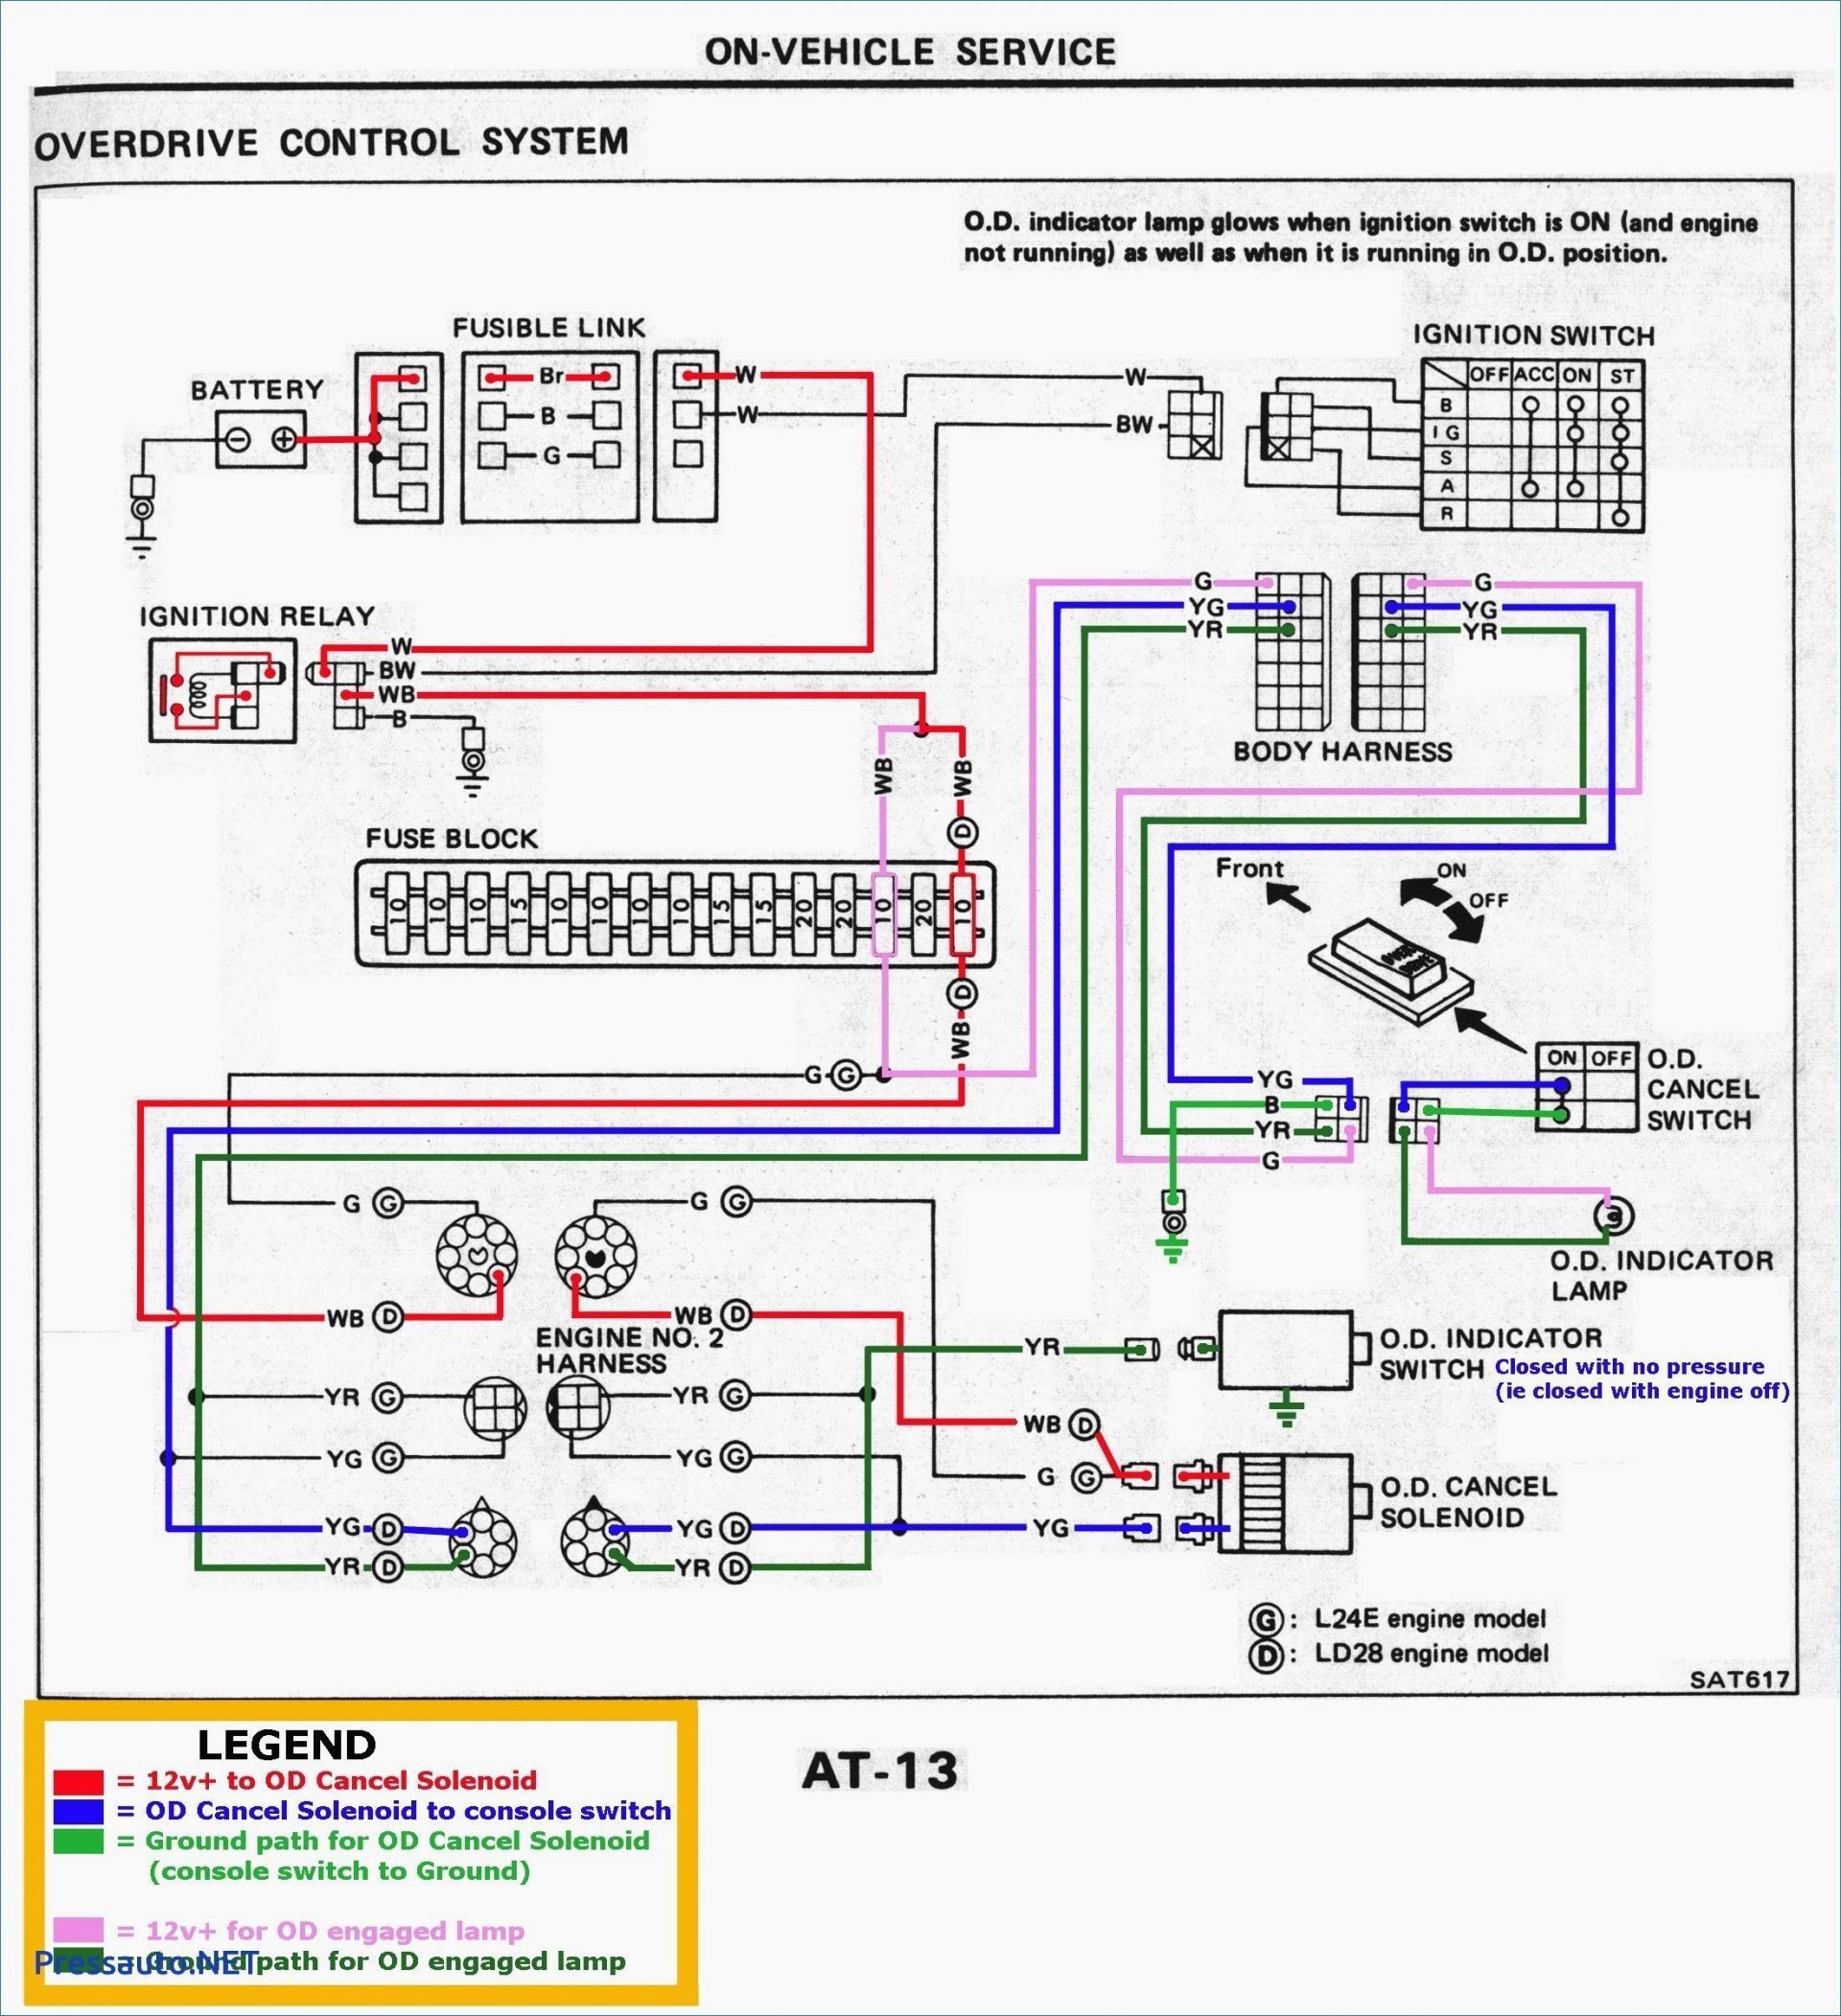 Wiring Diagram For A Relay For Fog Lights New Wiring Diagram For Trailer Light Plug Fresh Trailer Light Harness